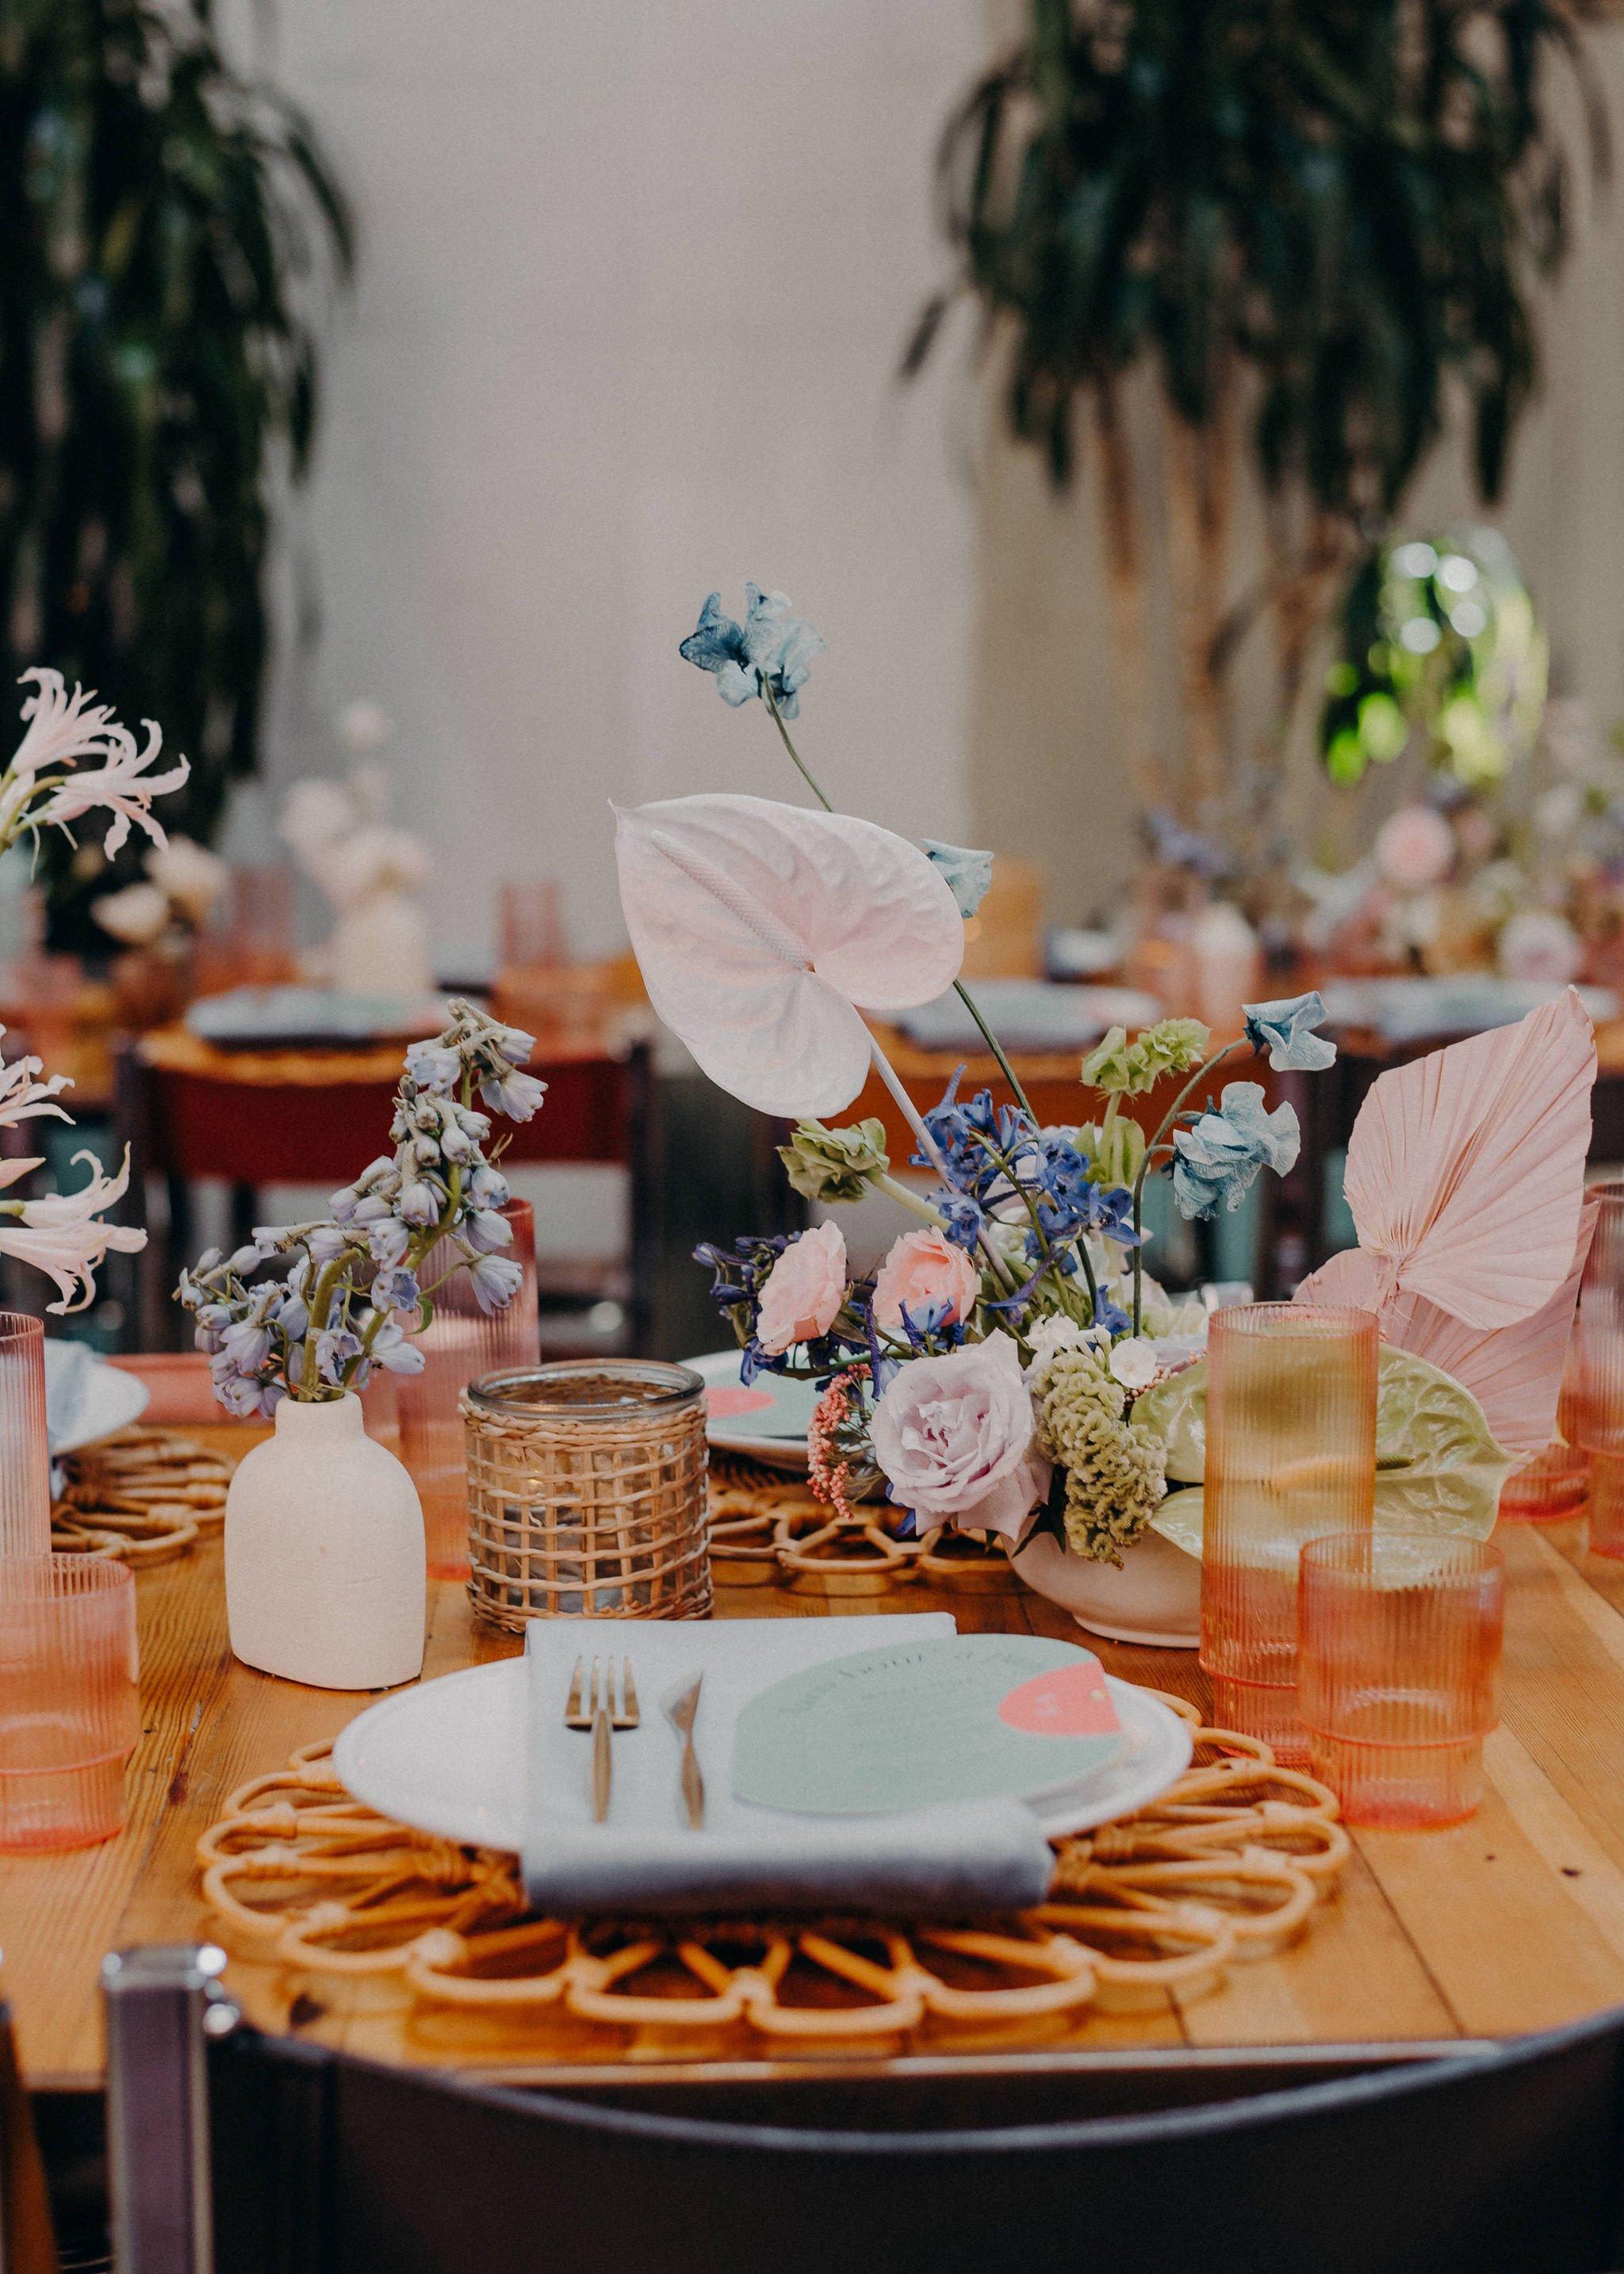 colorful and bright table rentals for this dtla wedding